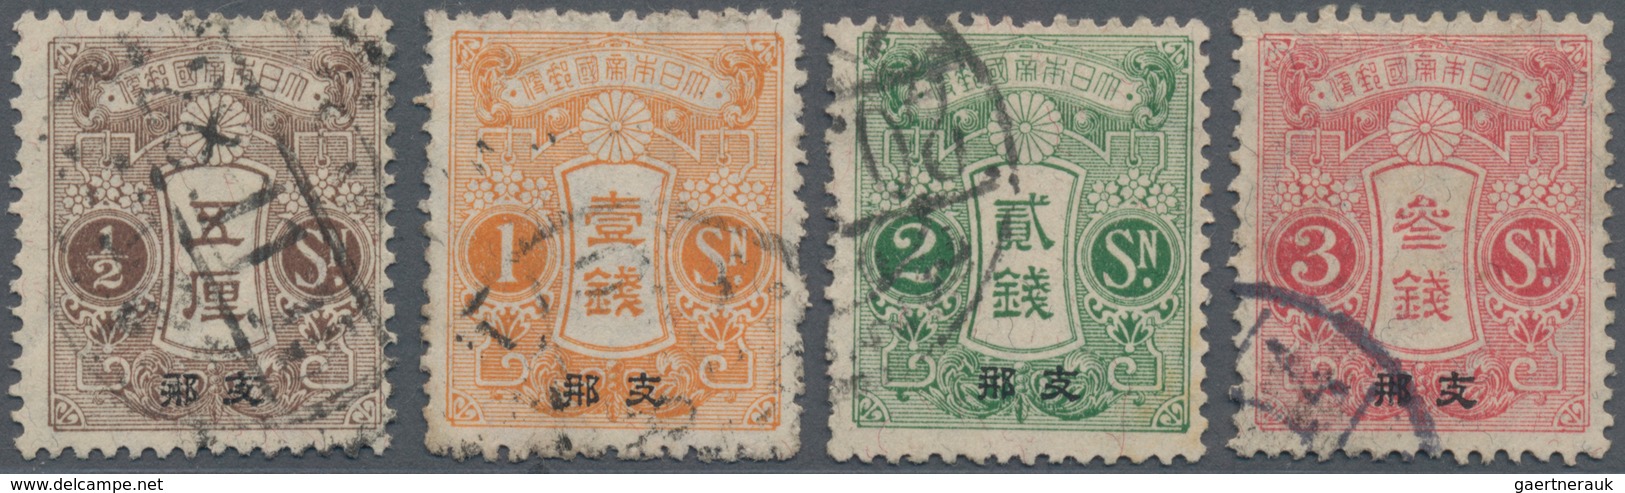 Japanische Post In China: 1900/14, Japanese Offices In China, Mint And Used On Stockcards Inc. Two P - 1943-45 Shanghai & Nanking